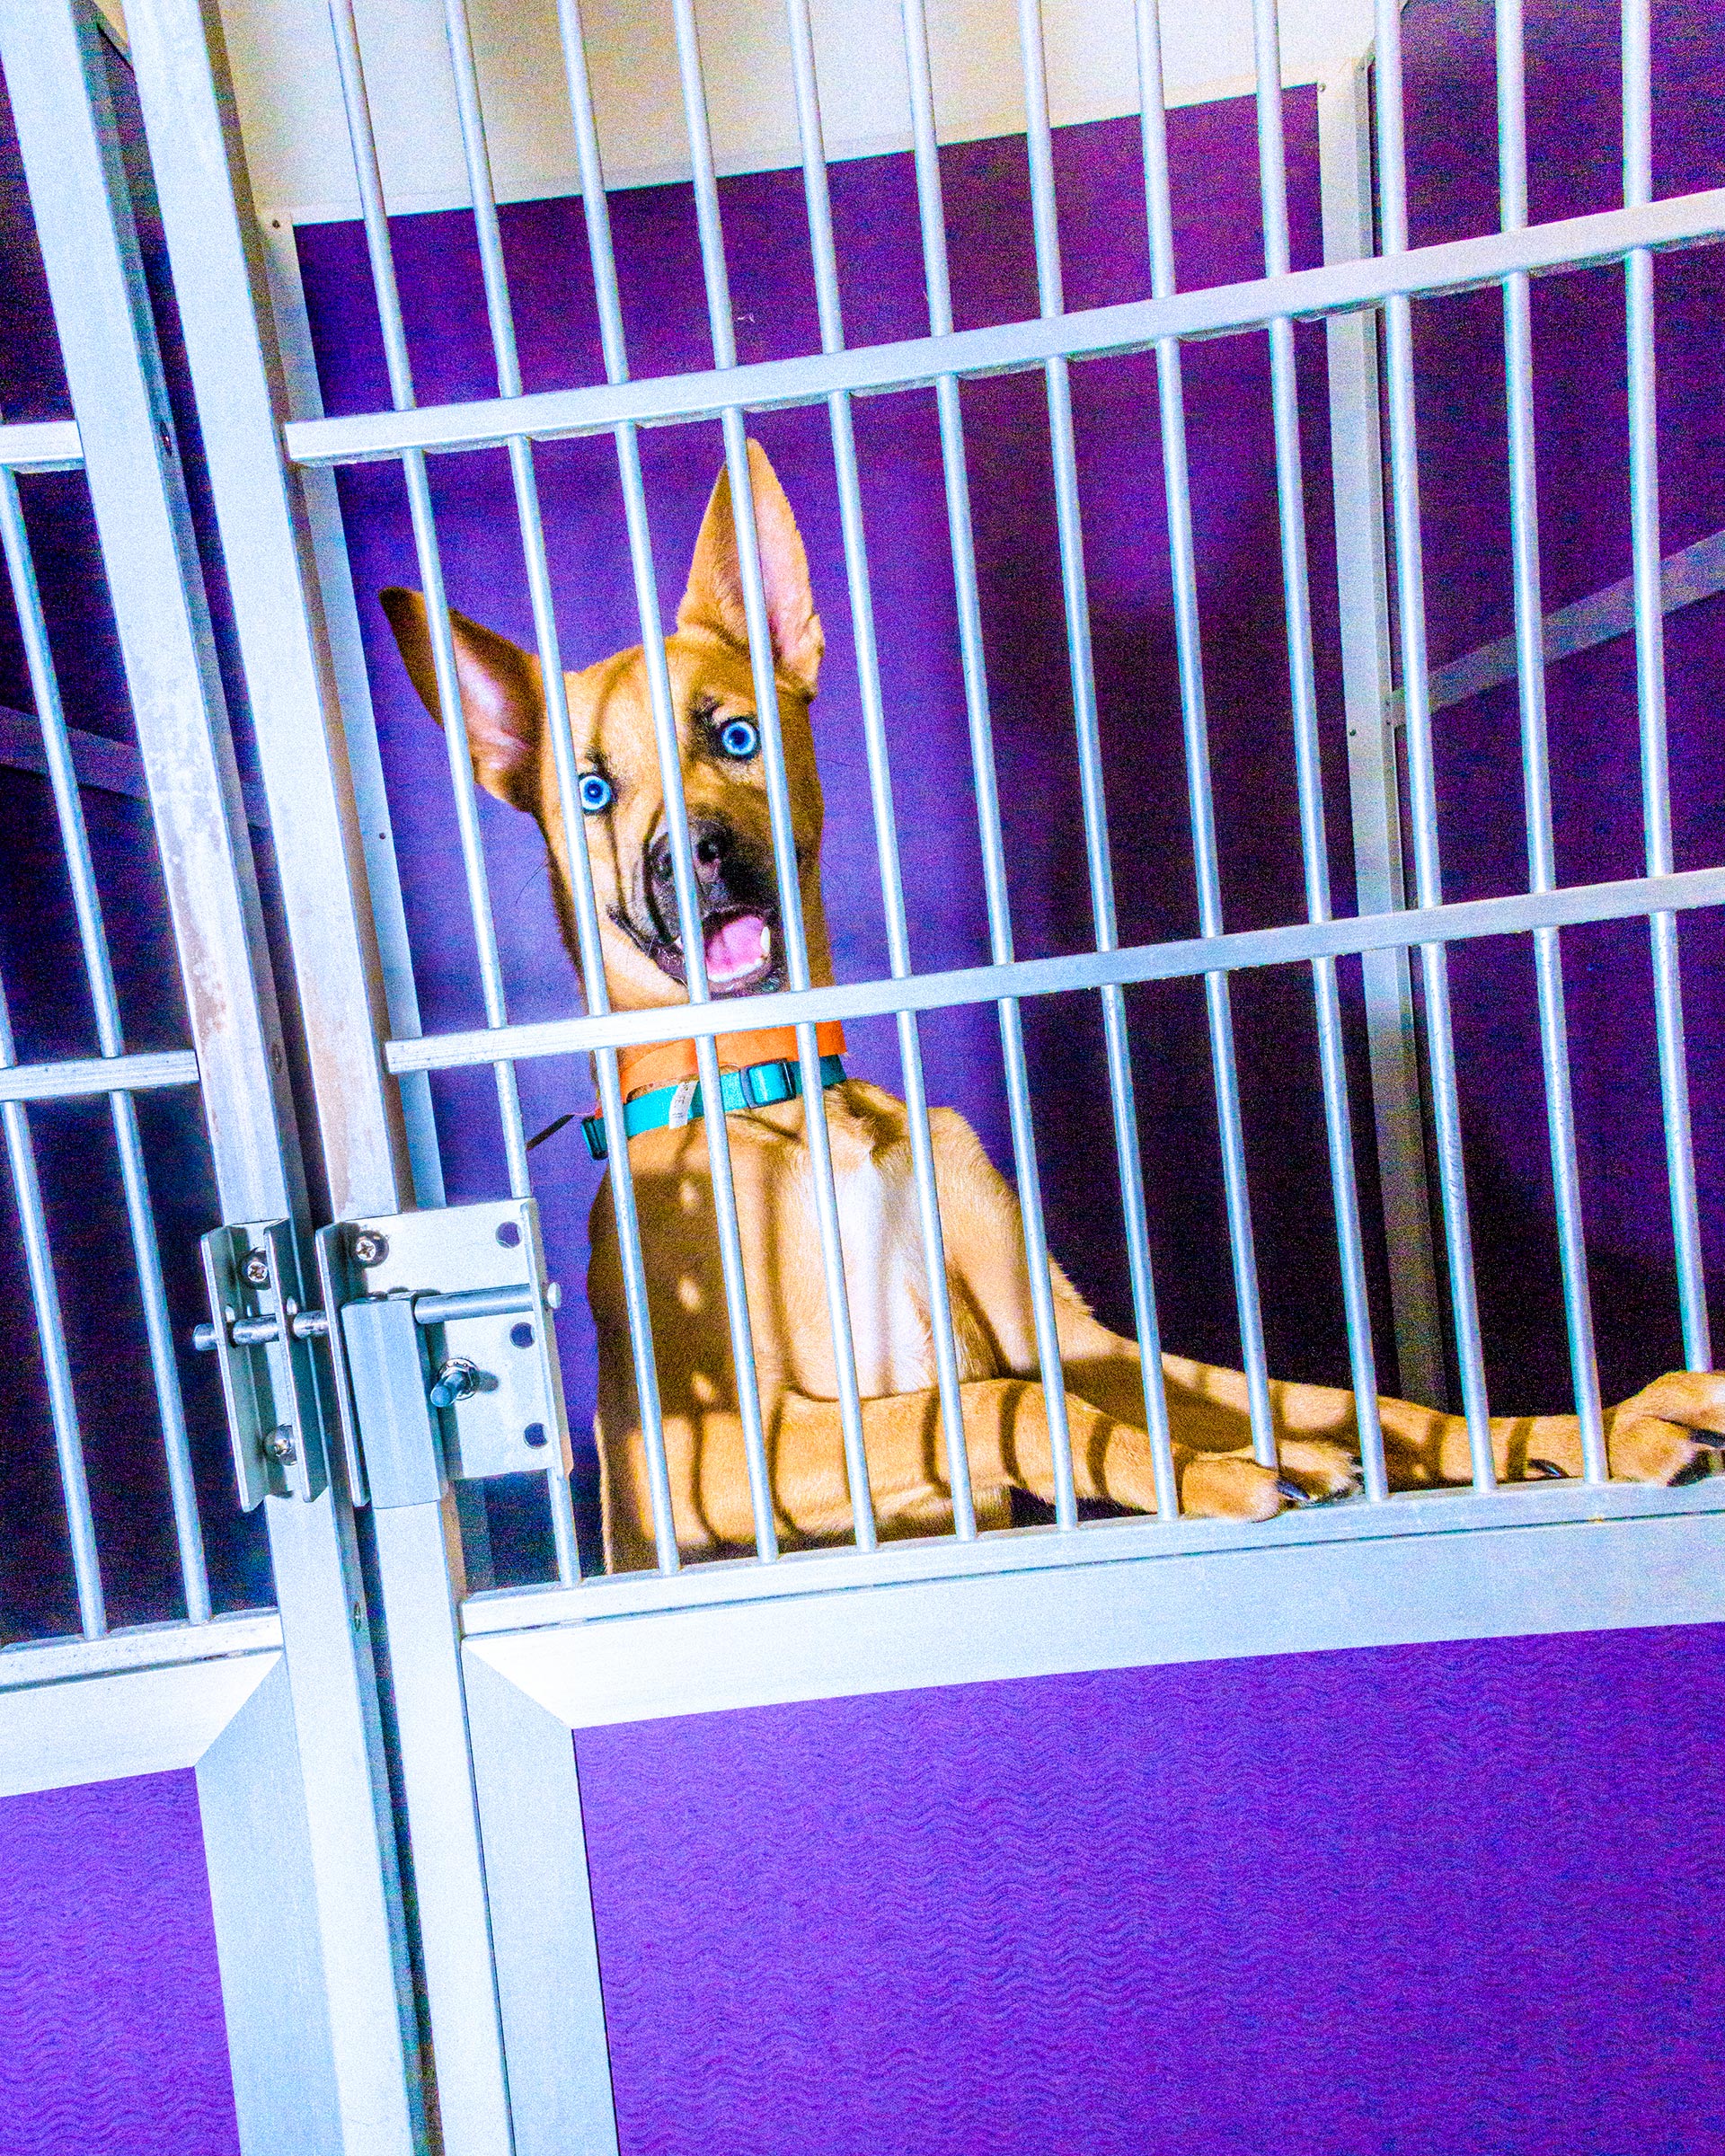 How America Saved Millions of Pets—By Moving Them